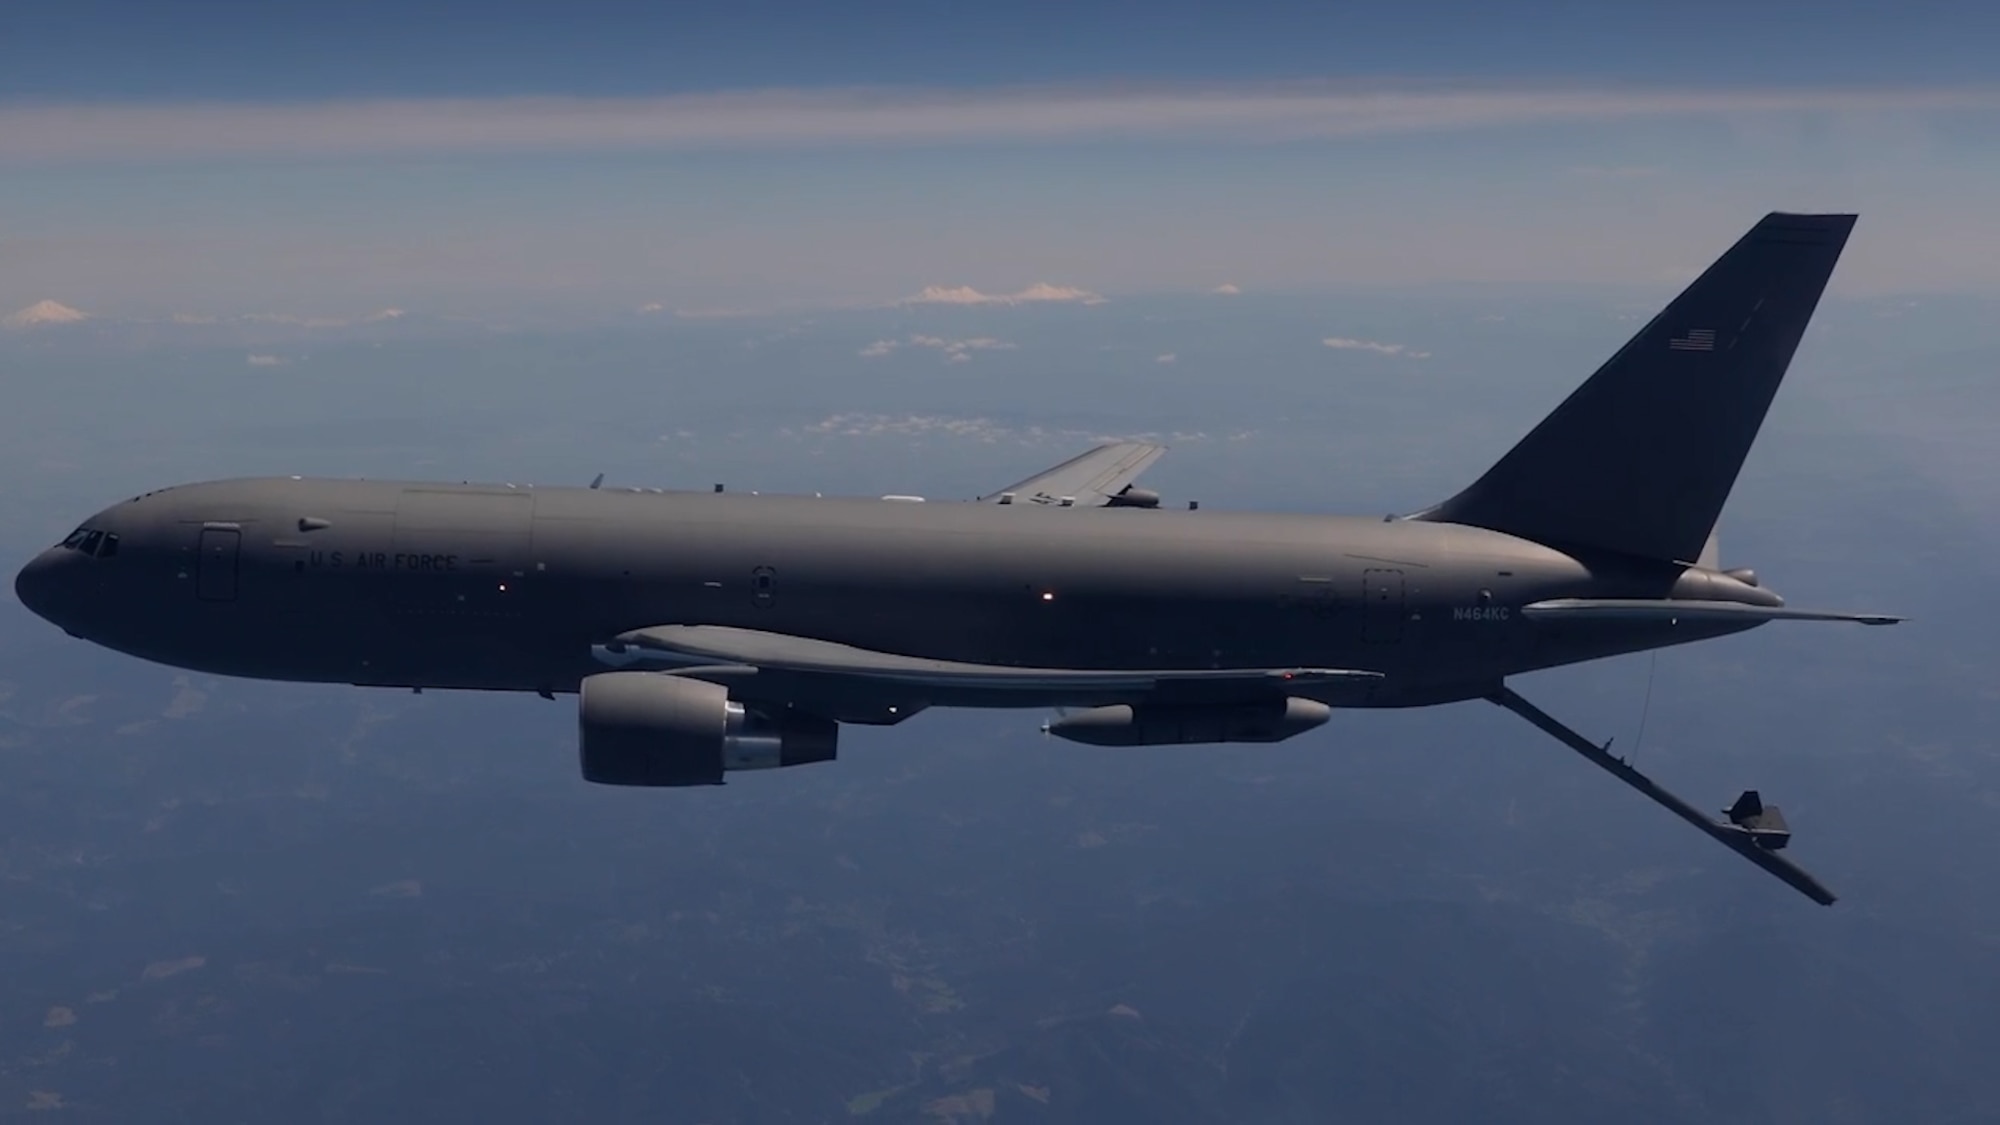 A KC-46 Pegasus conducts an air refueling test mission over the skies of Southern California. Rigorous planning goes on before any any aircraft come together in the refueling envelope. The partnership of Boeing and the U.S. Air Force includes the development of Flight Test Procedures (FTP’s) and multiple safety reviews of those procedures. (Photo Courtesy of Boeing)